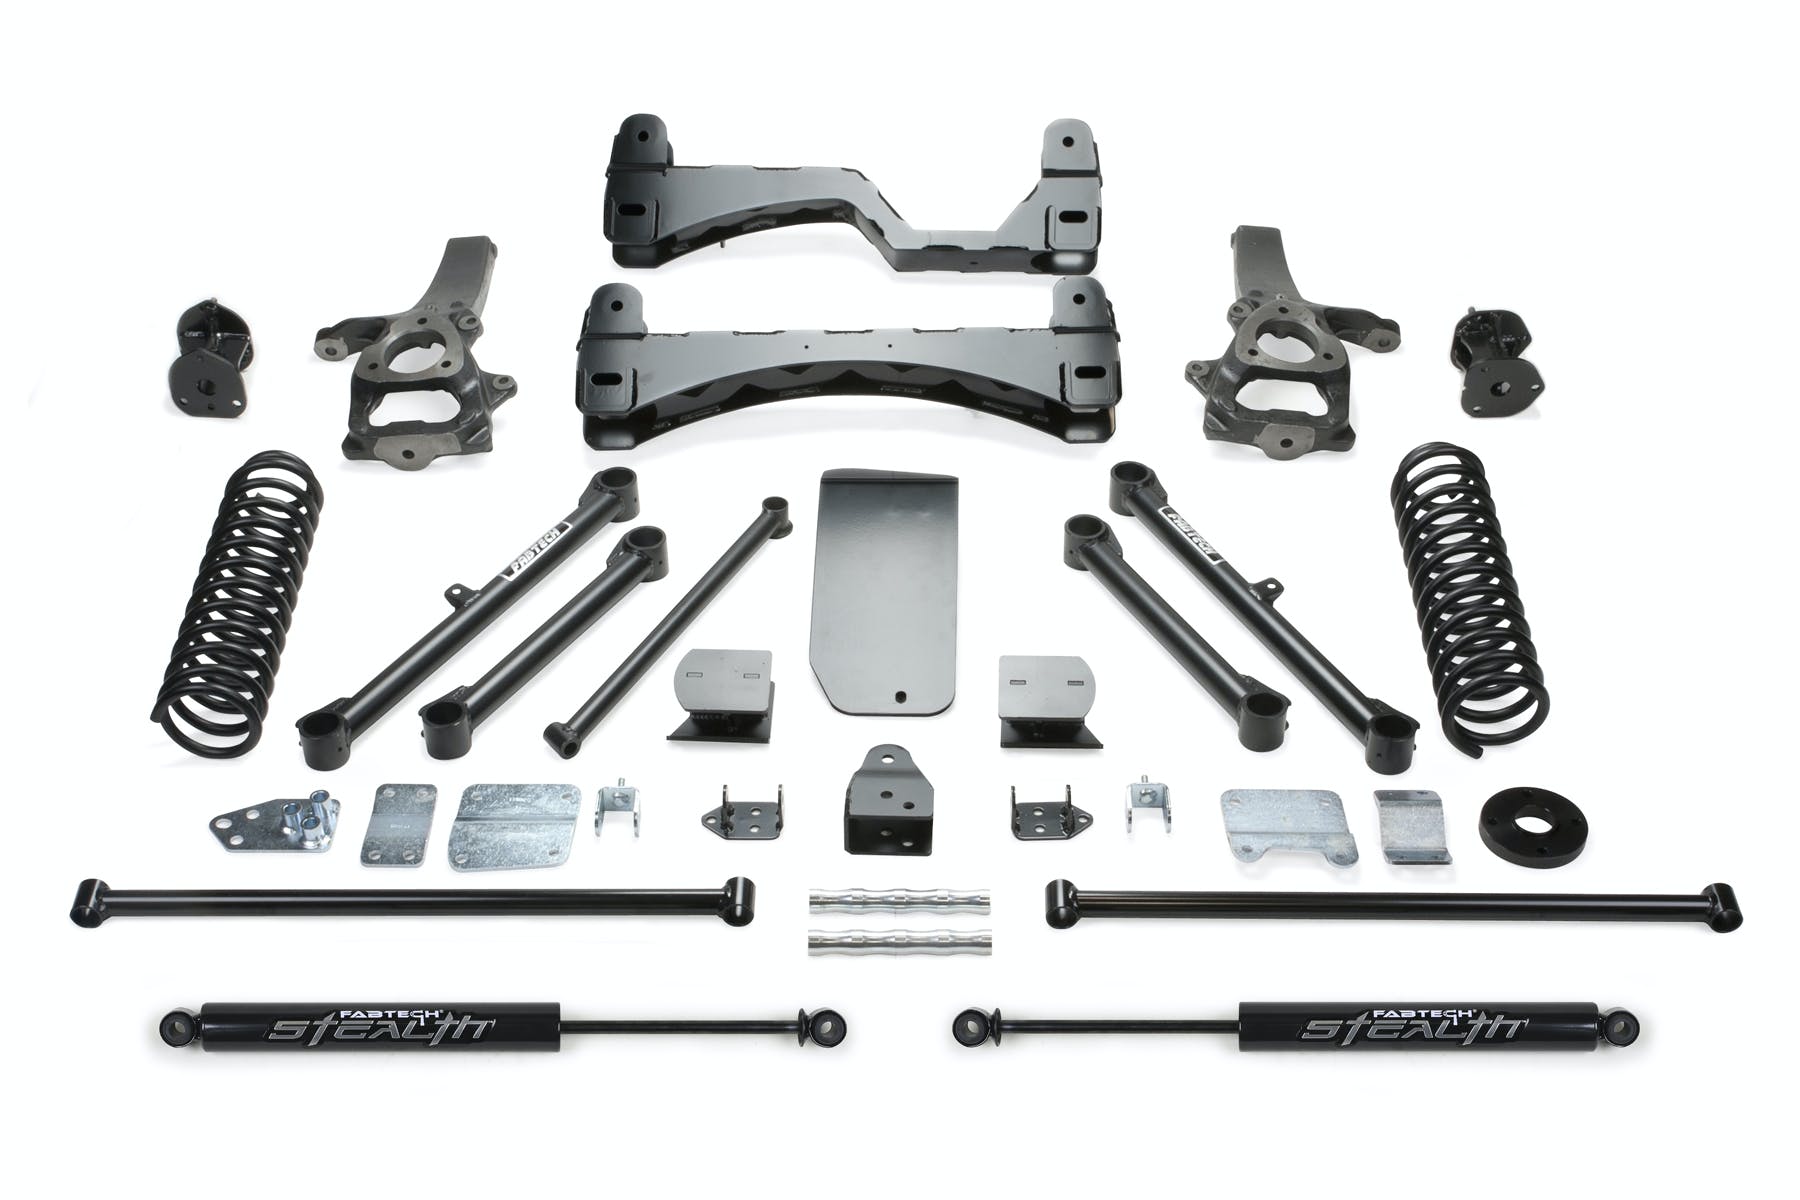 Fabtech K3053M 6in. BASIC SYS W/STEALTH 2009-11 DODGE 1500 4WD